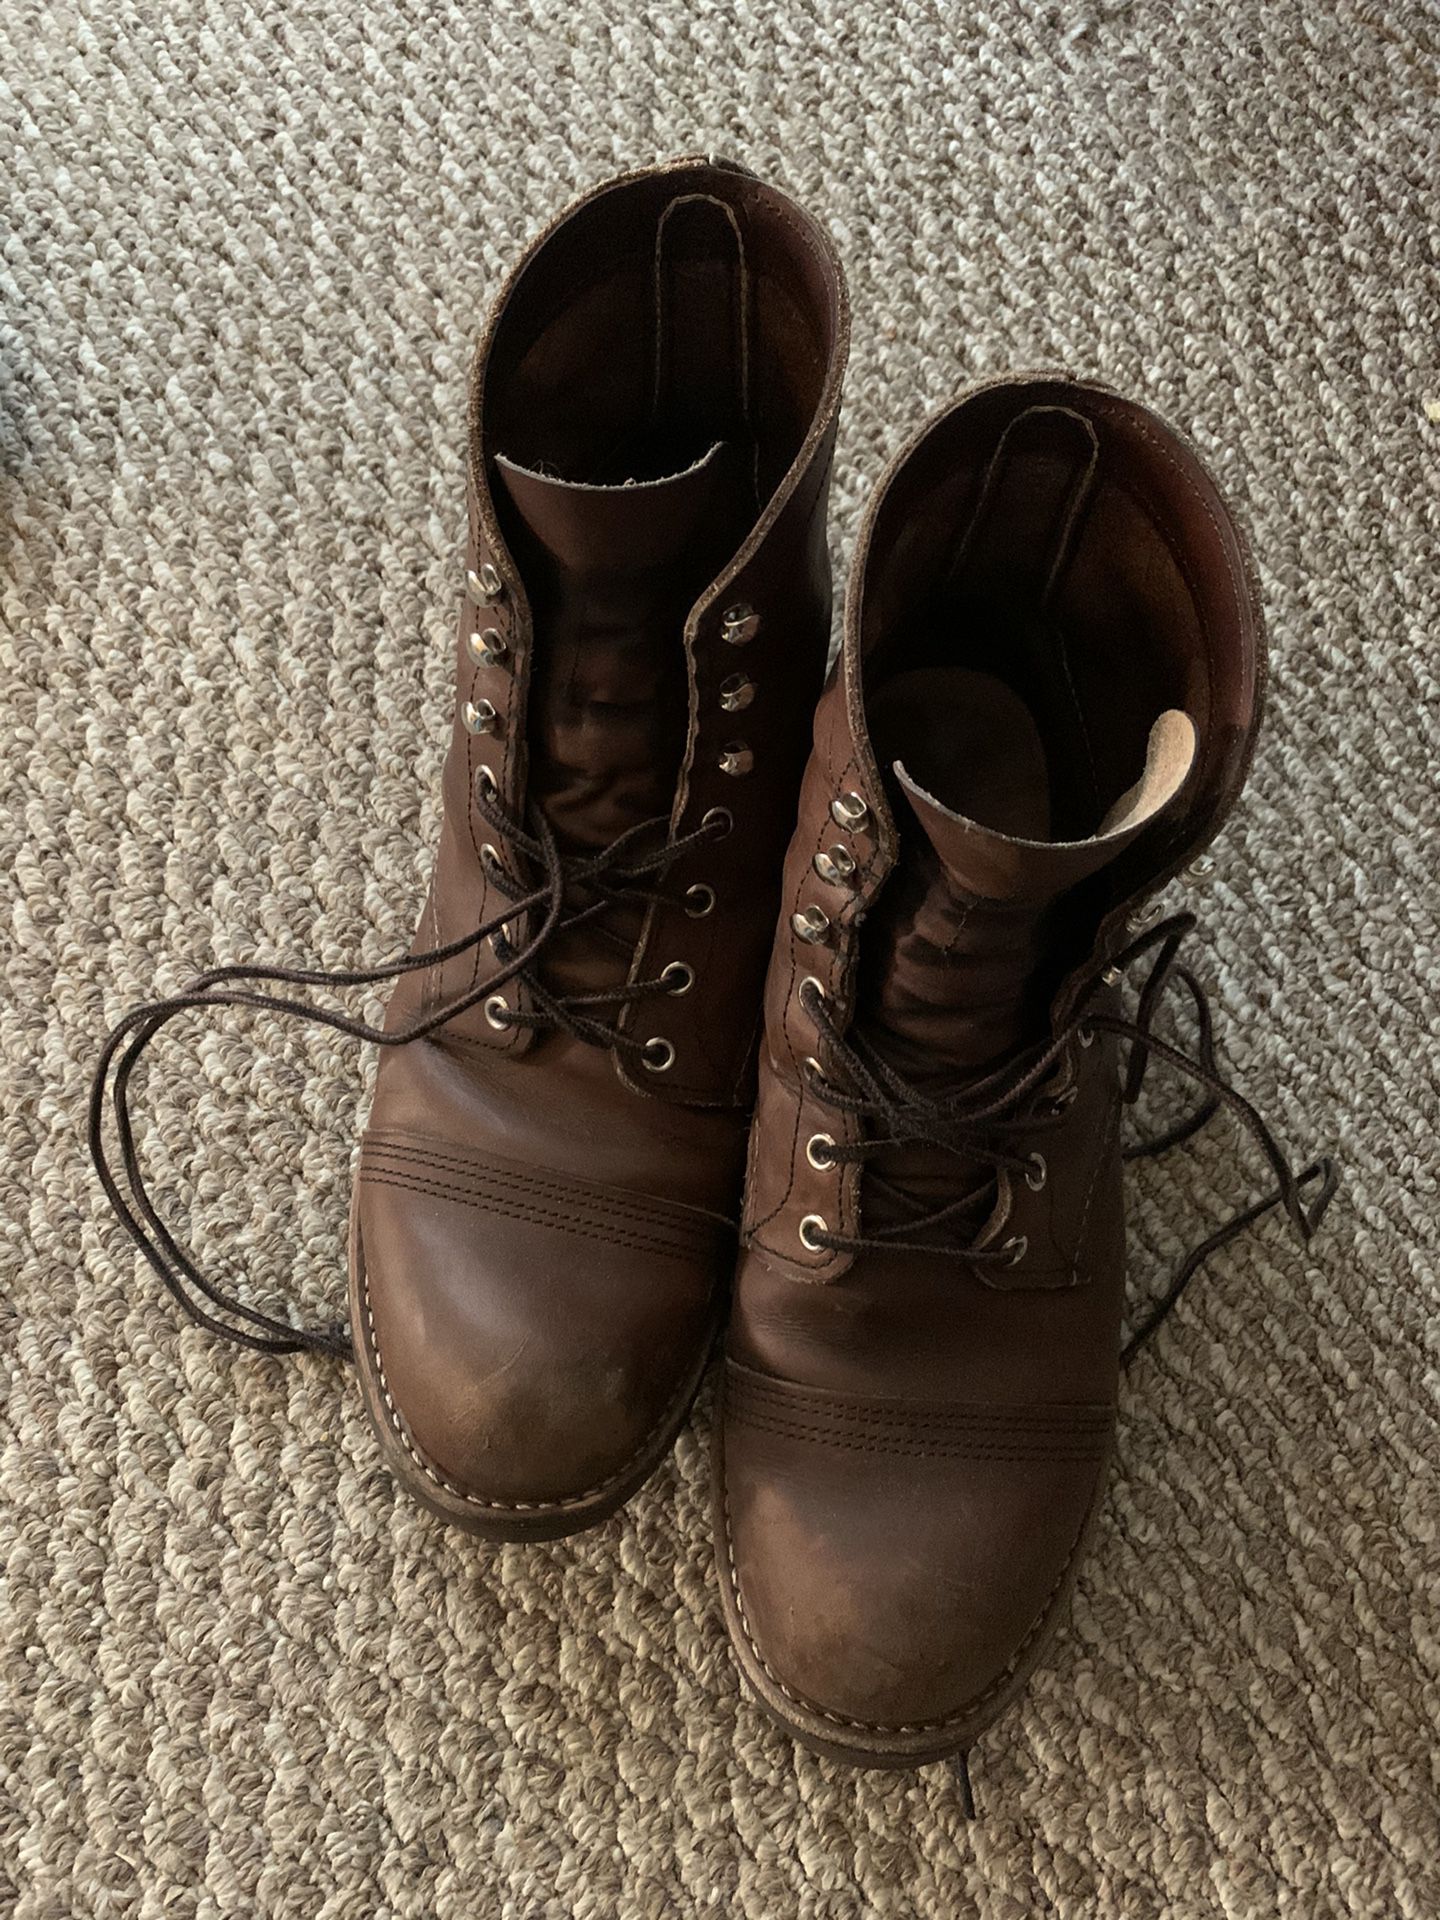 Red wing iron ranger boots